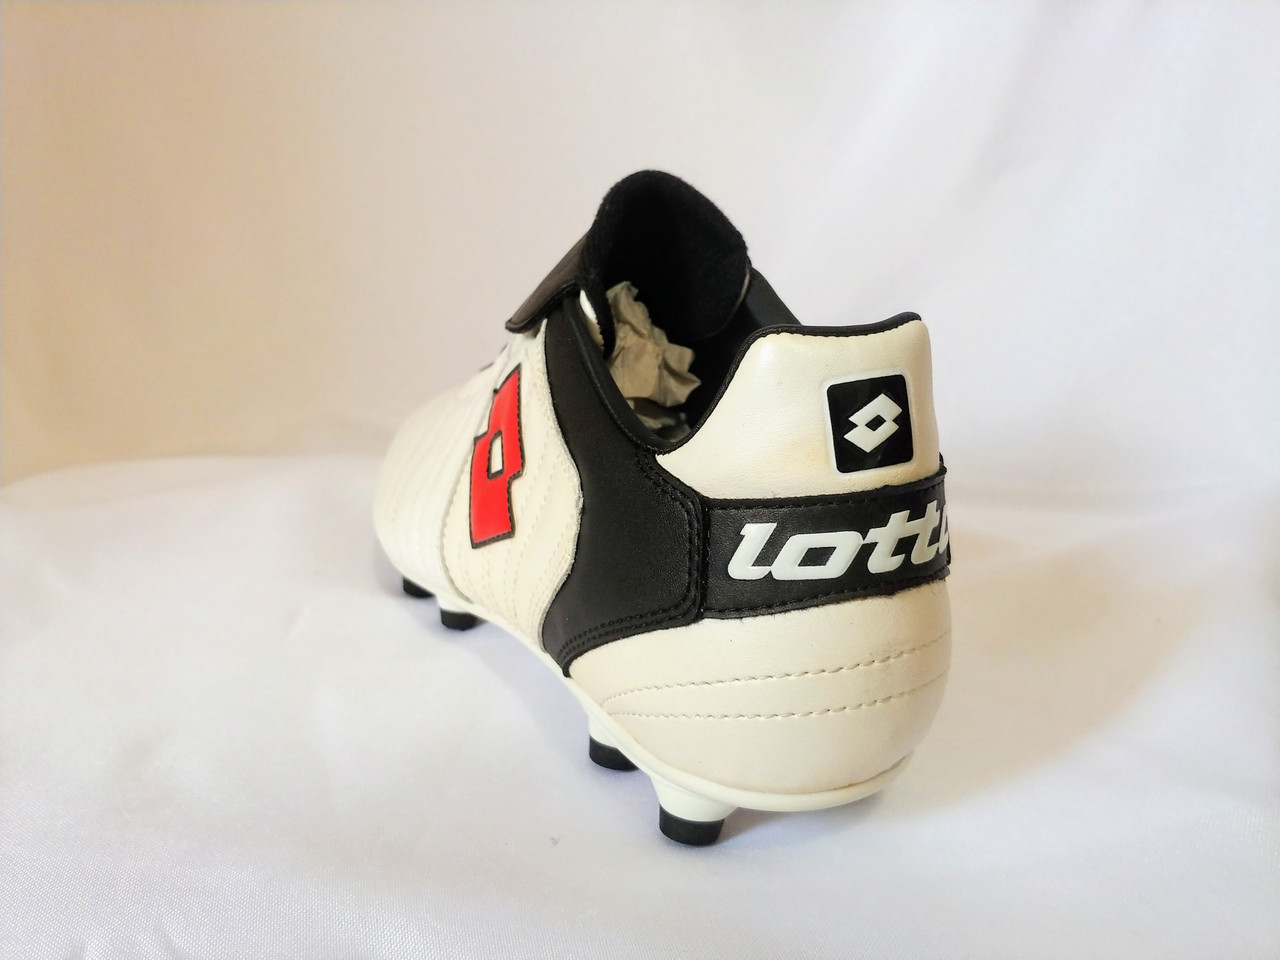 Lotto Mens SERIE A FG Soccer Cleats Black White & Red 